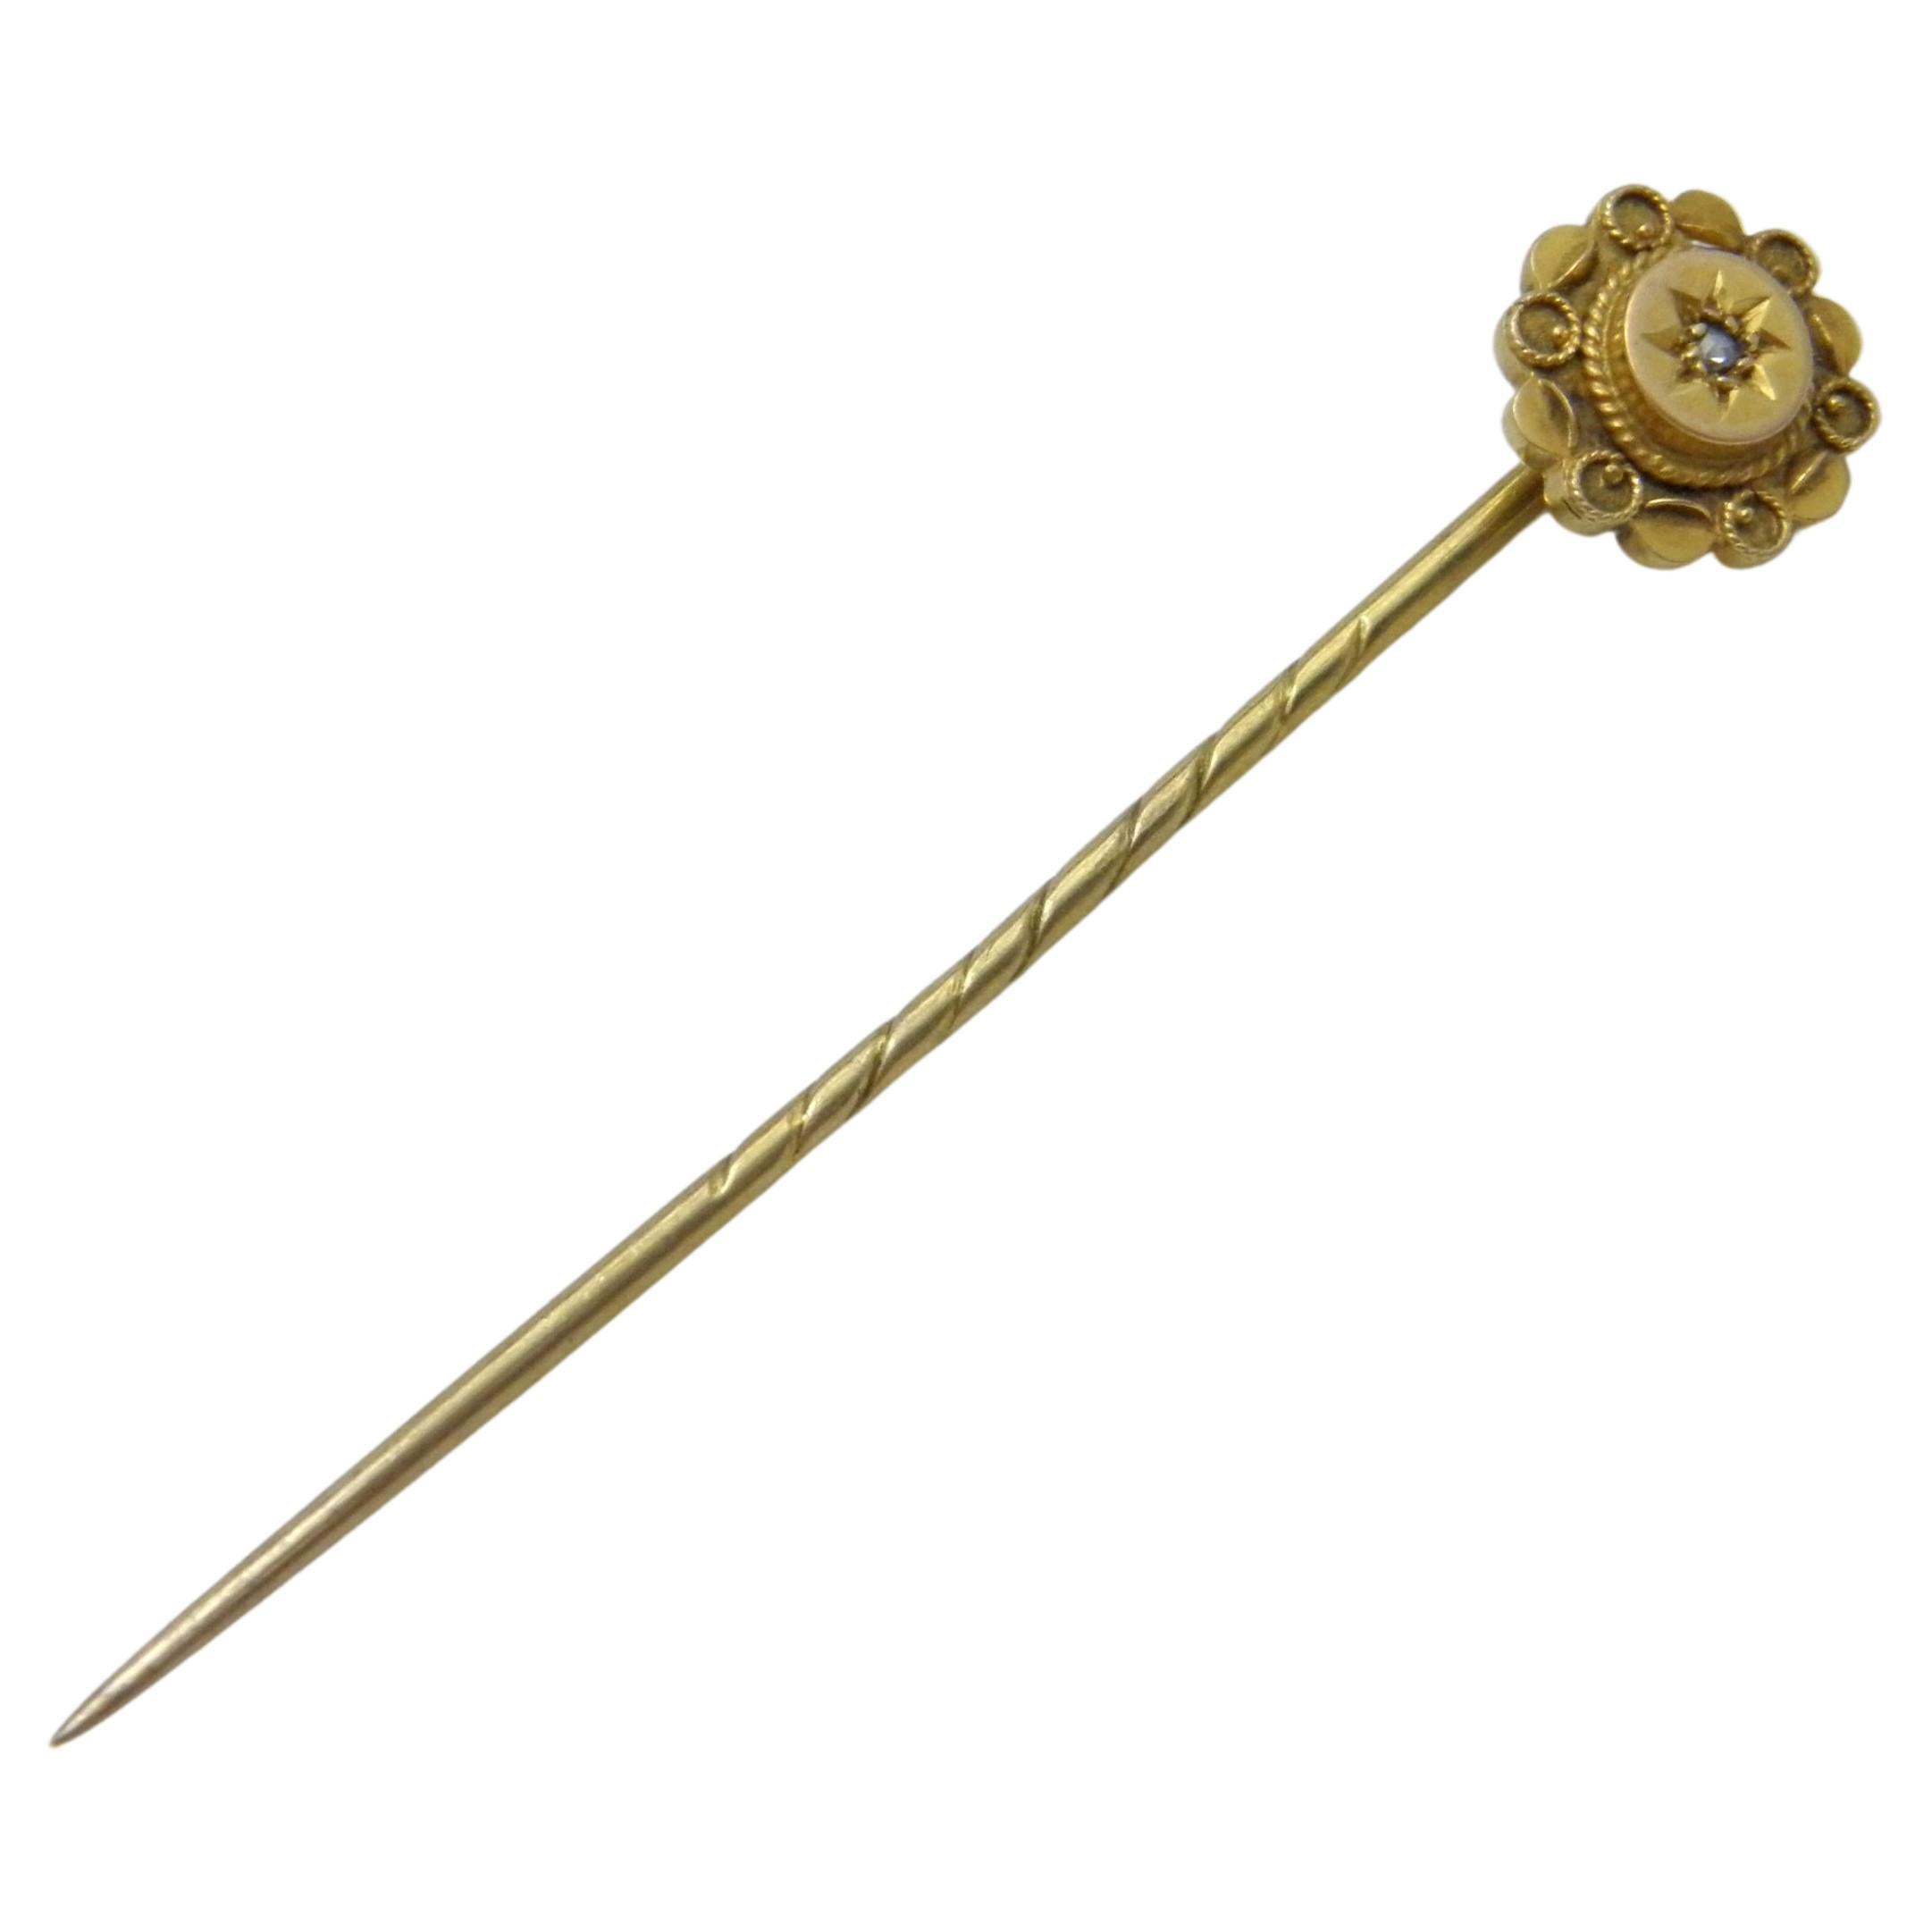 Antique 15ct Gold Diamond Stock Pin Brooch c1880 Heavy 625 Purity Tie Lapel Hat For Sale